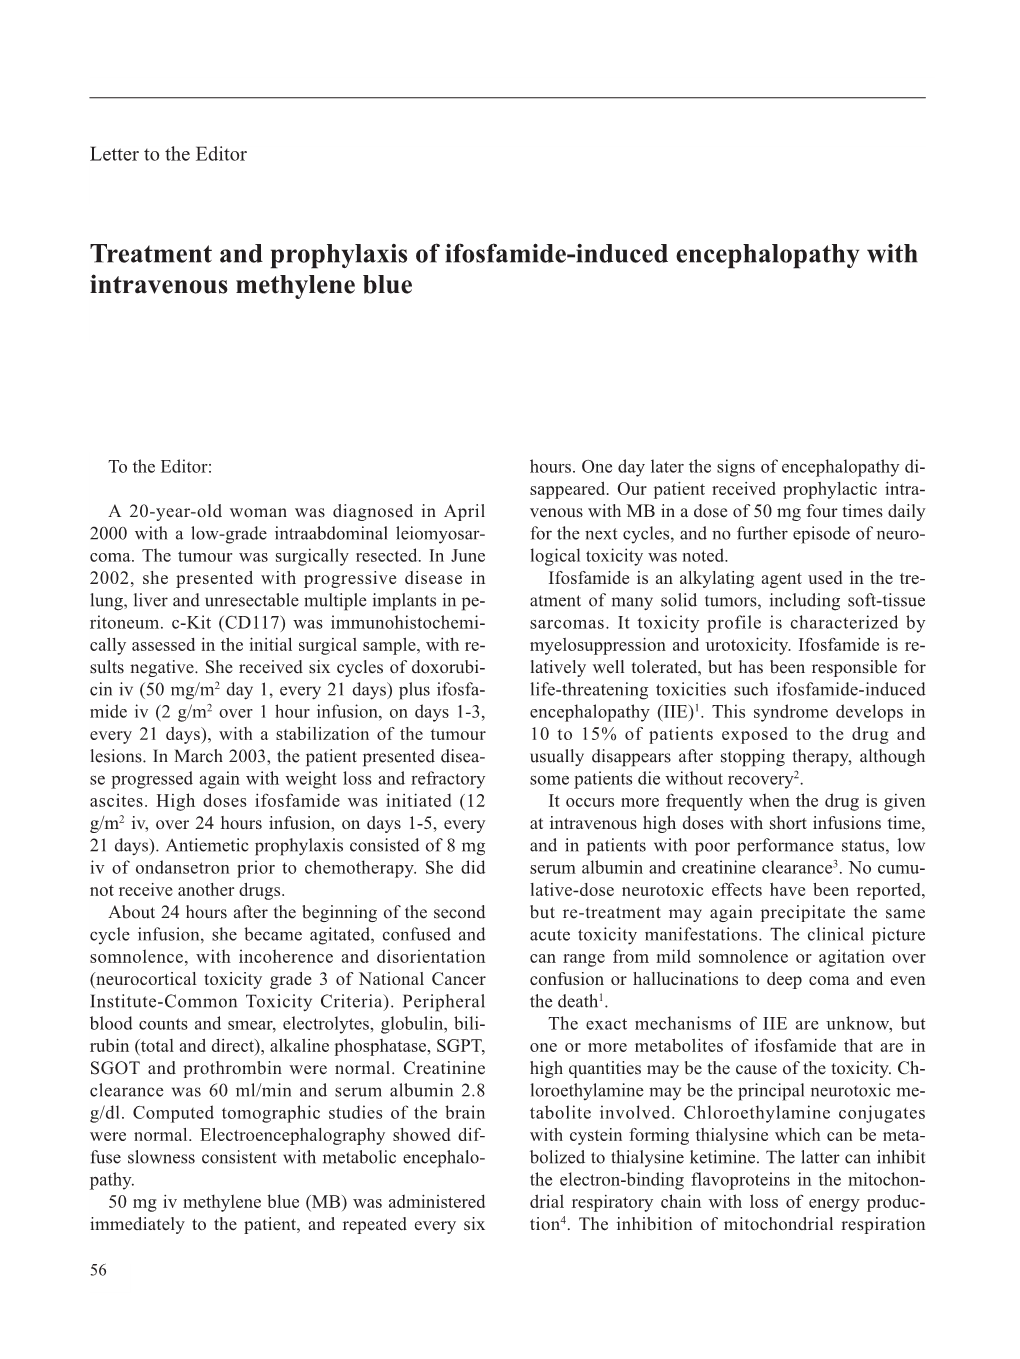 Treatment and Prophylaxis of Ifosfamide-Induced Encephalopathy with Intravenous Methylene Blue